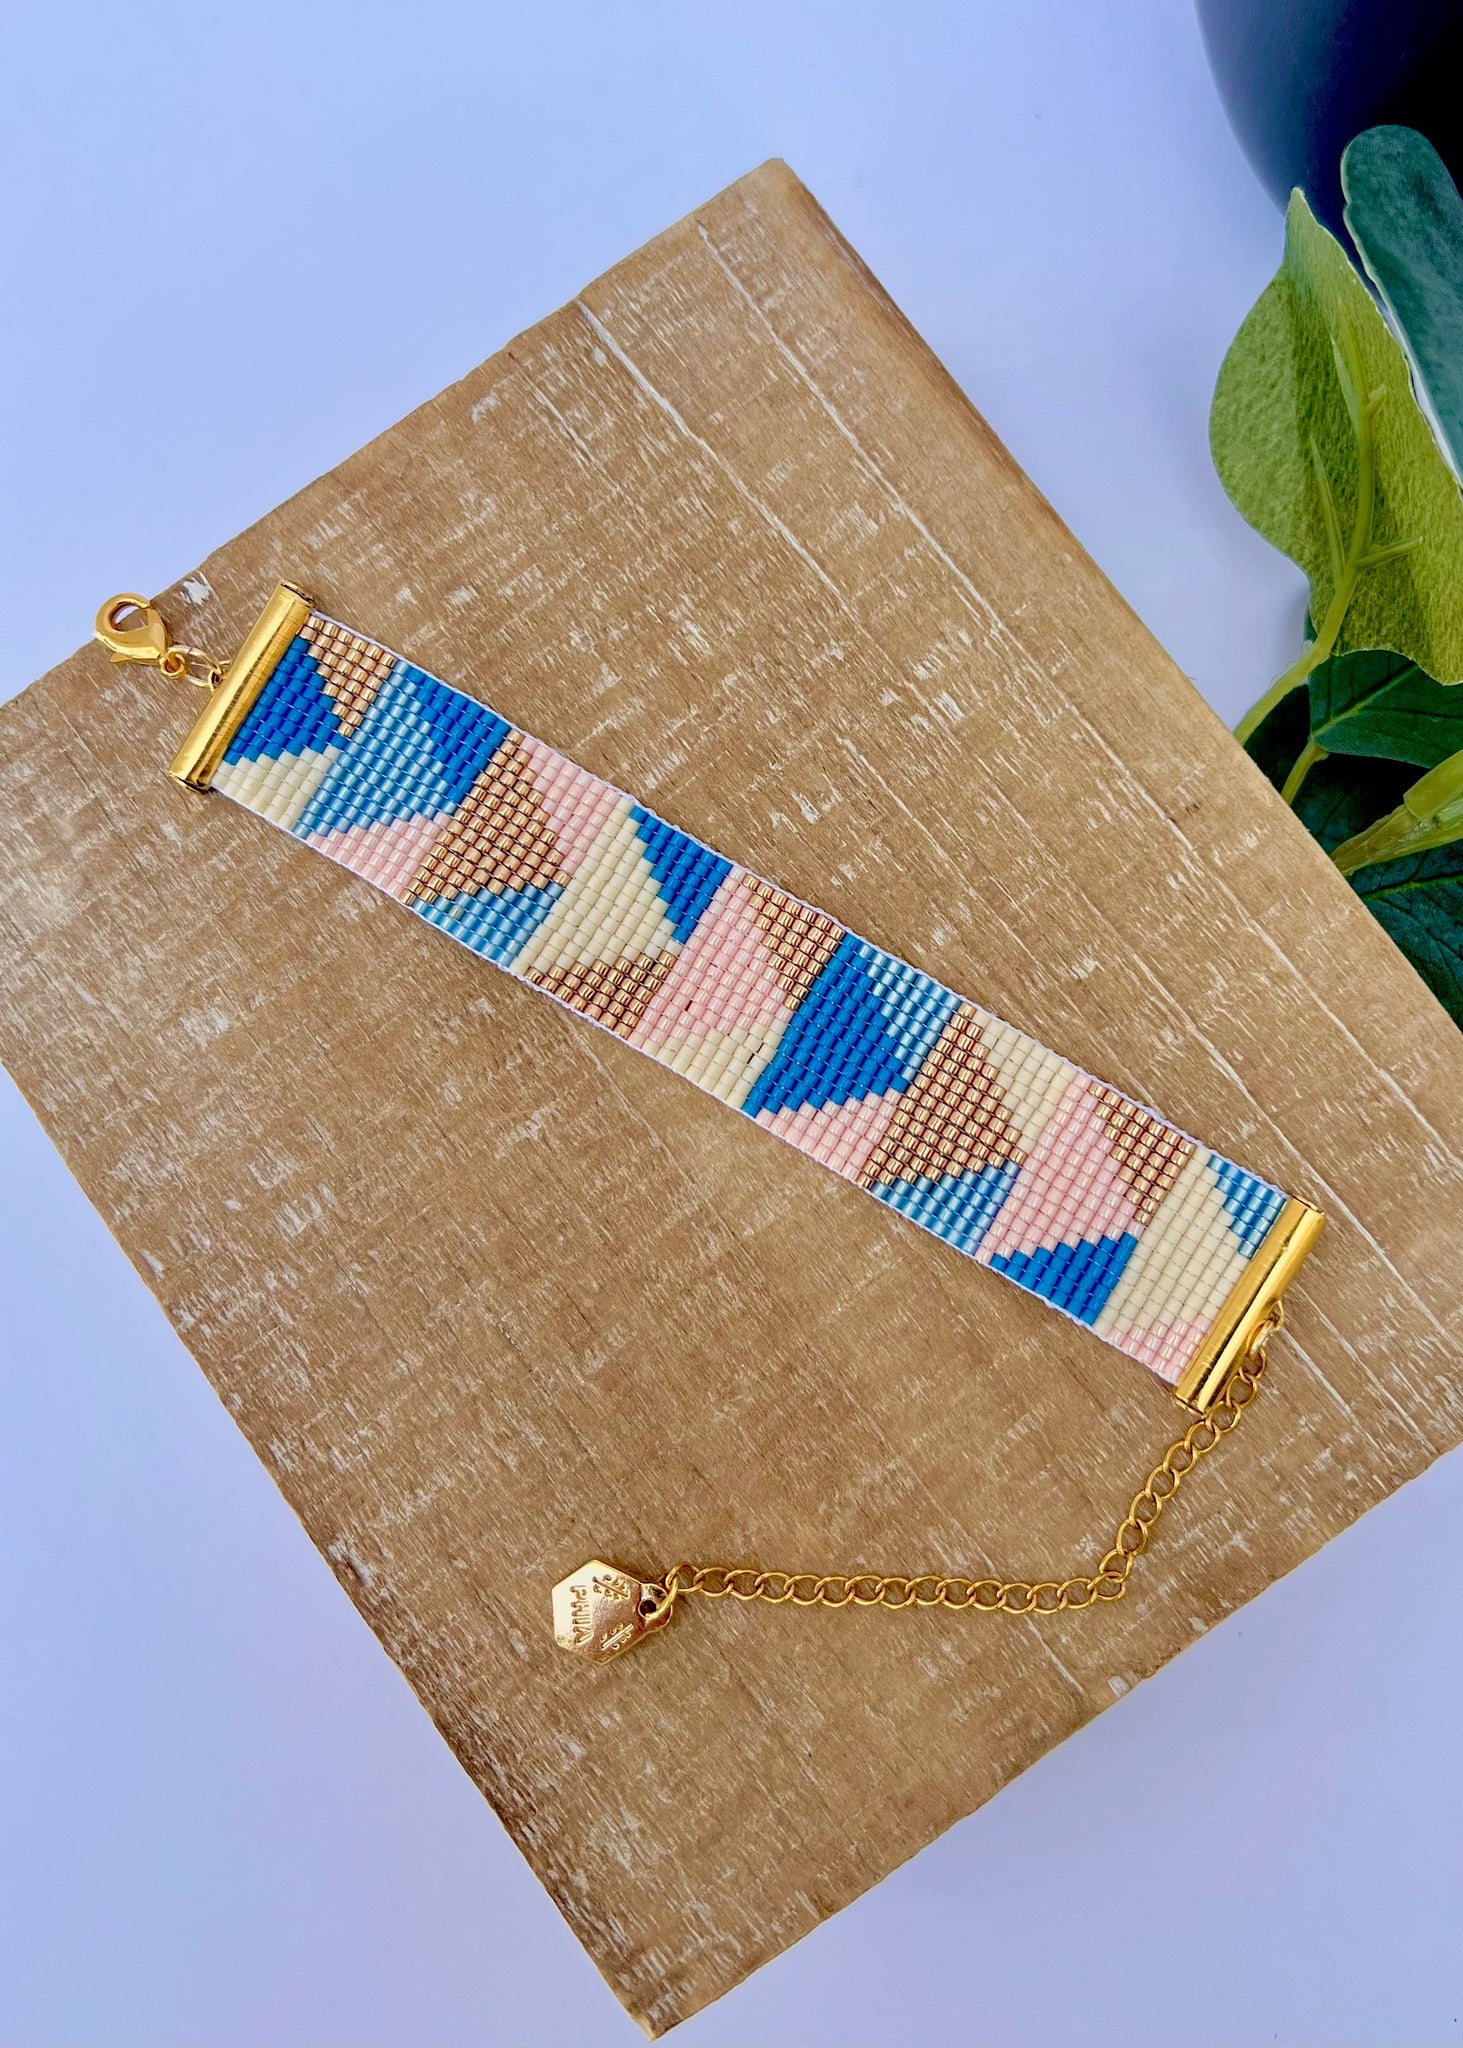 🌟 Join our exclusive bracelet weaving workshop on May 18th! 🌟